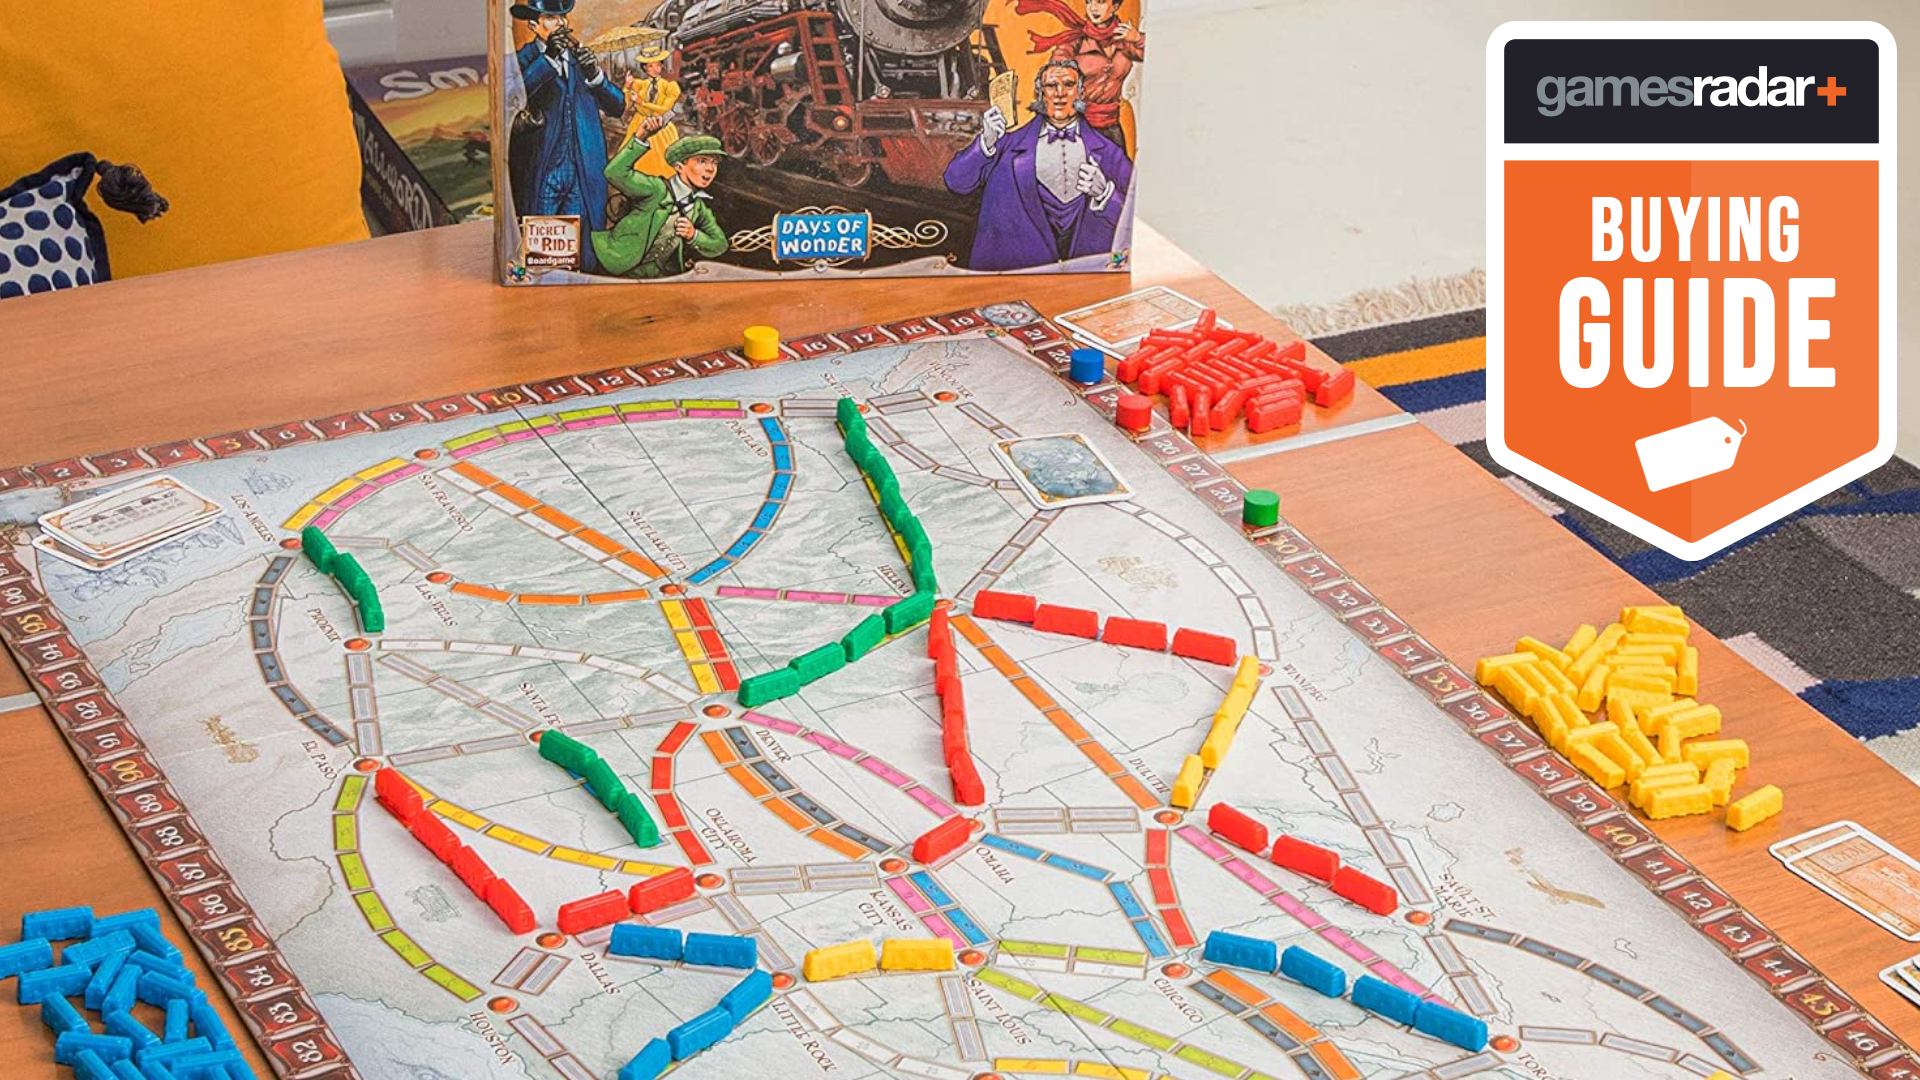 Must-have board games for families in 2022